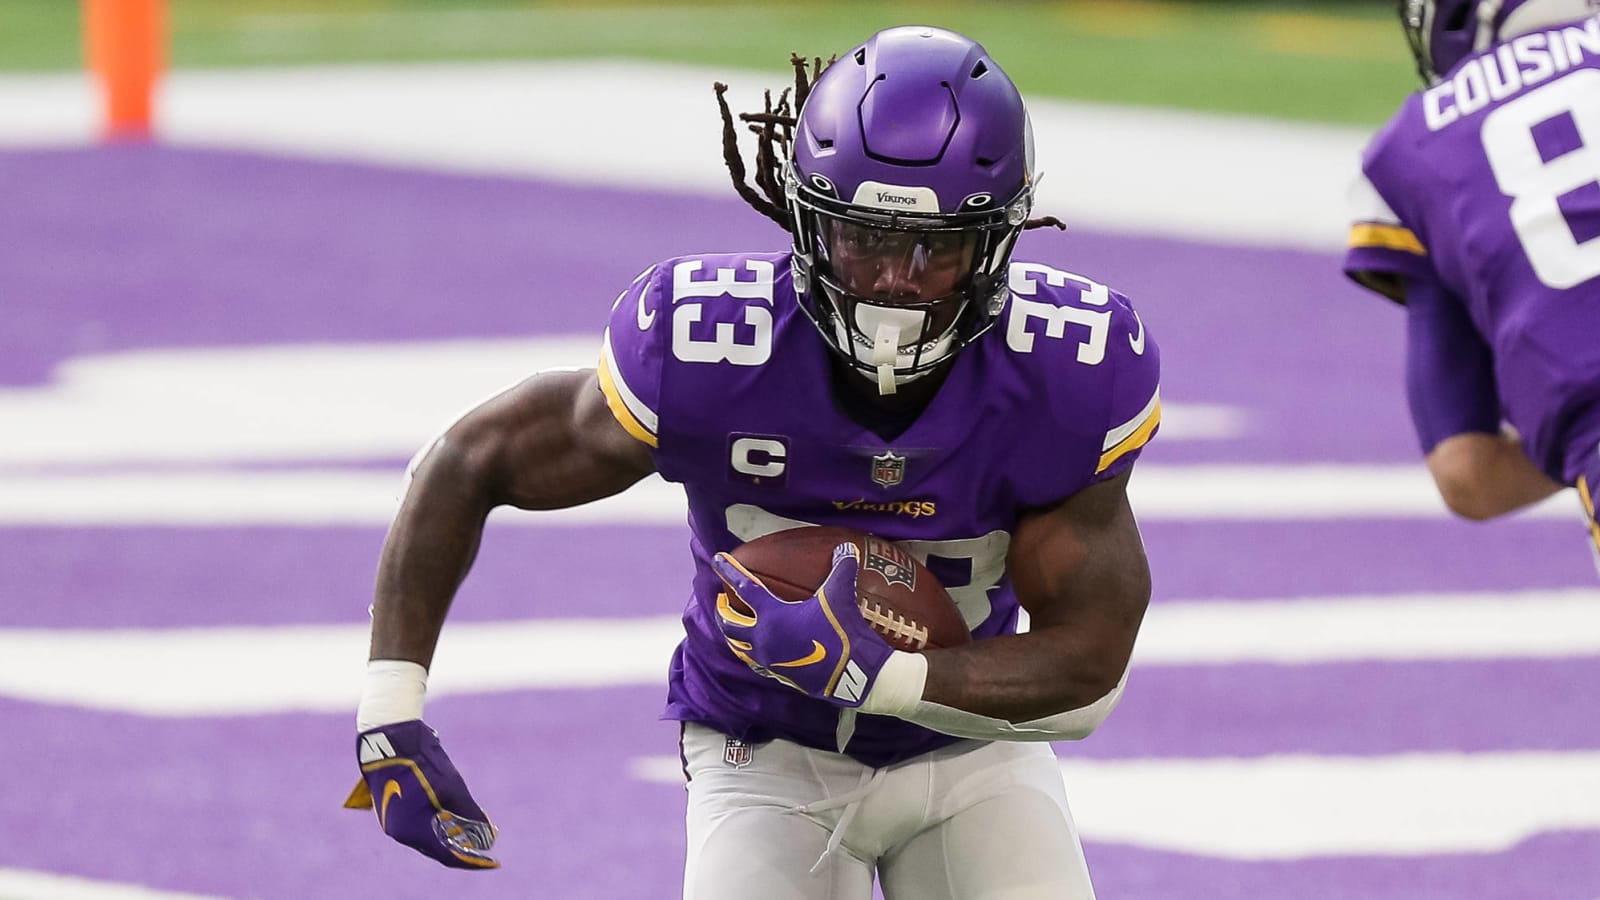 Ex-girlfriend now accuses Vikings’ Dalvin Cook of domestic violence